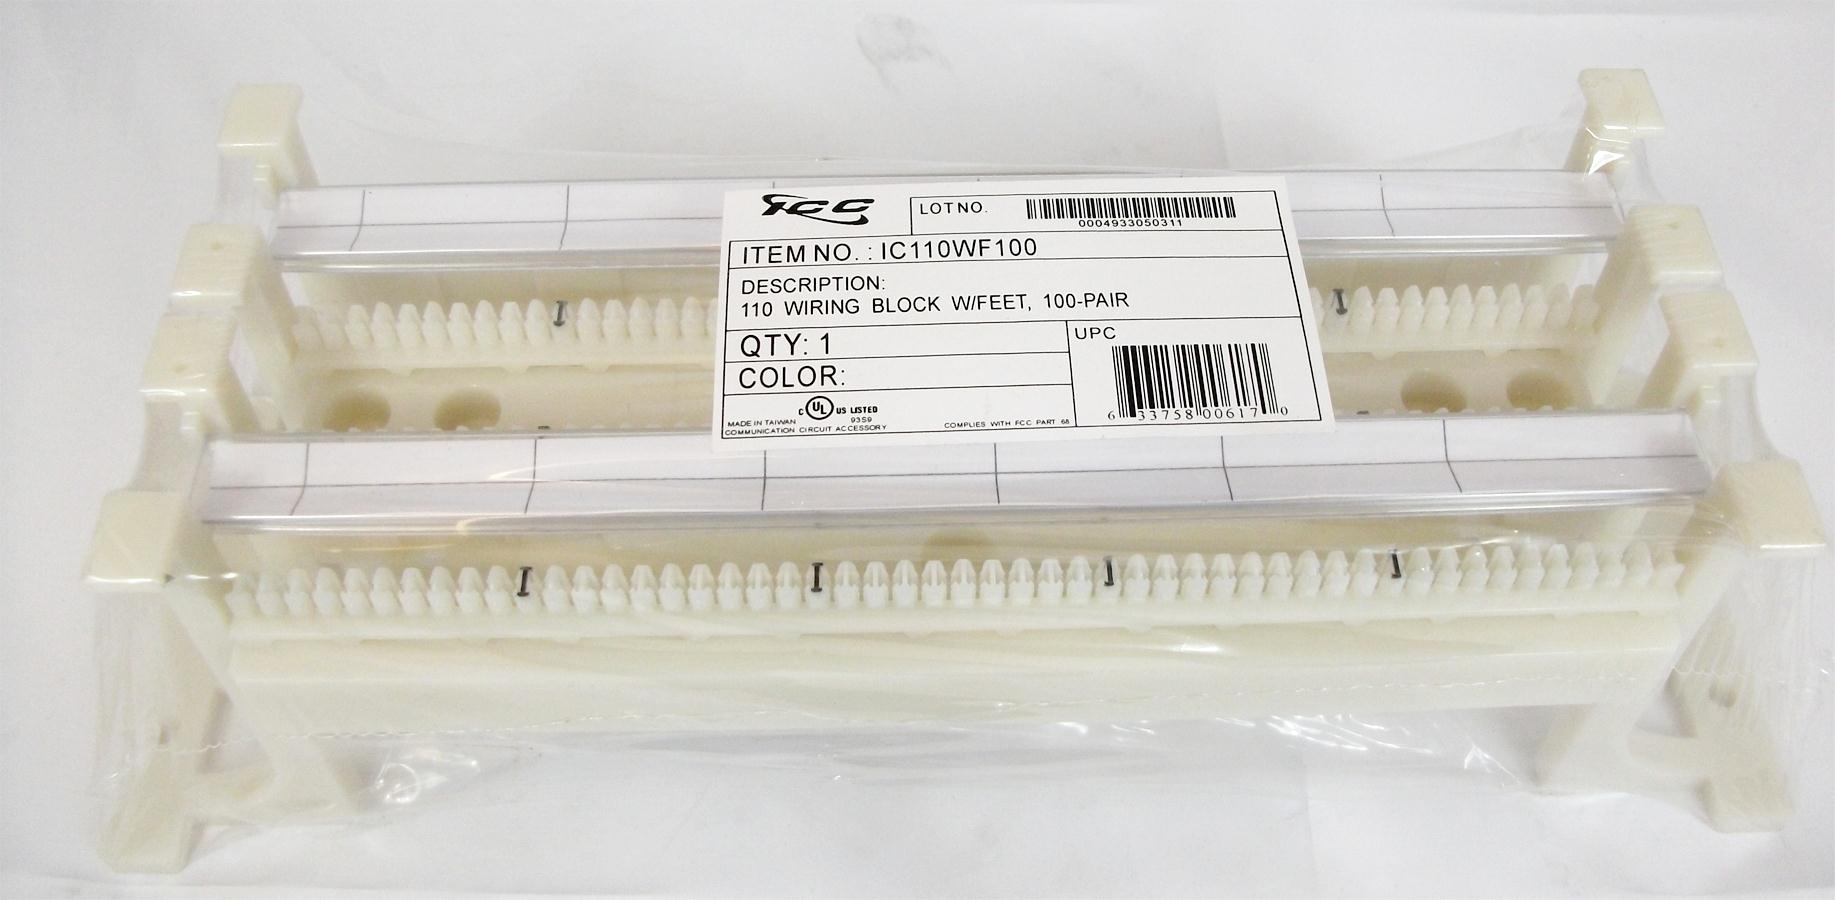 Cablesys-ICCIC110WF100